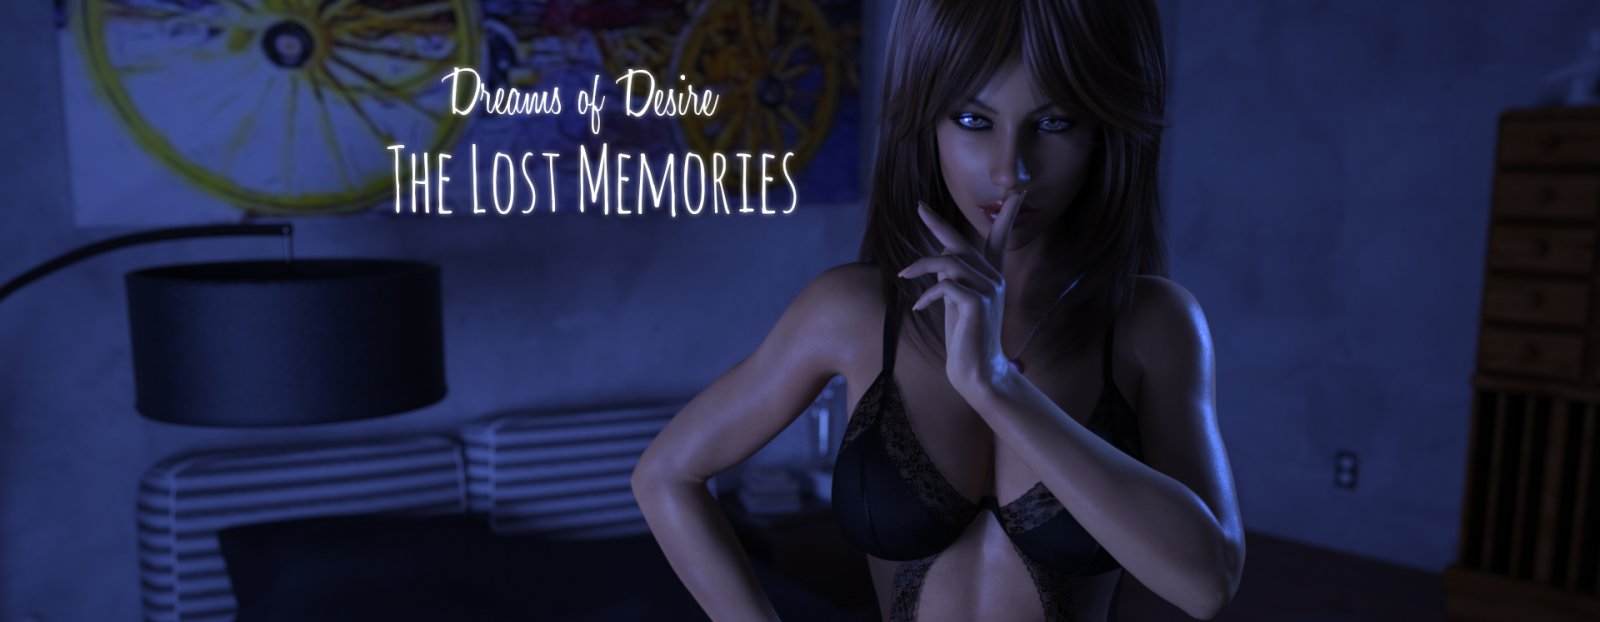 LewdLab - Dreams of Desire: The Lost Memories - Chapter 2 - Version 1.0 + Incest Patch Win/Mac